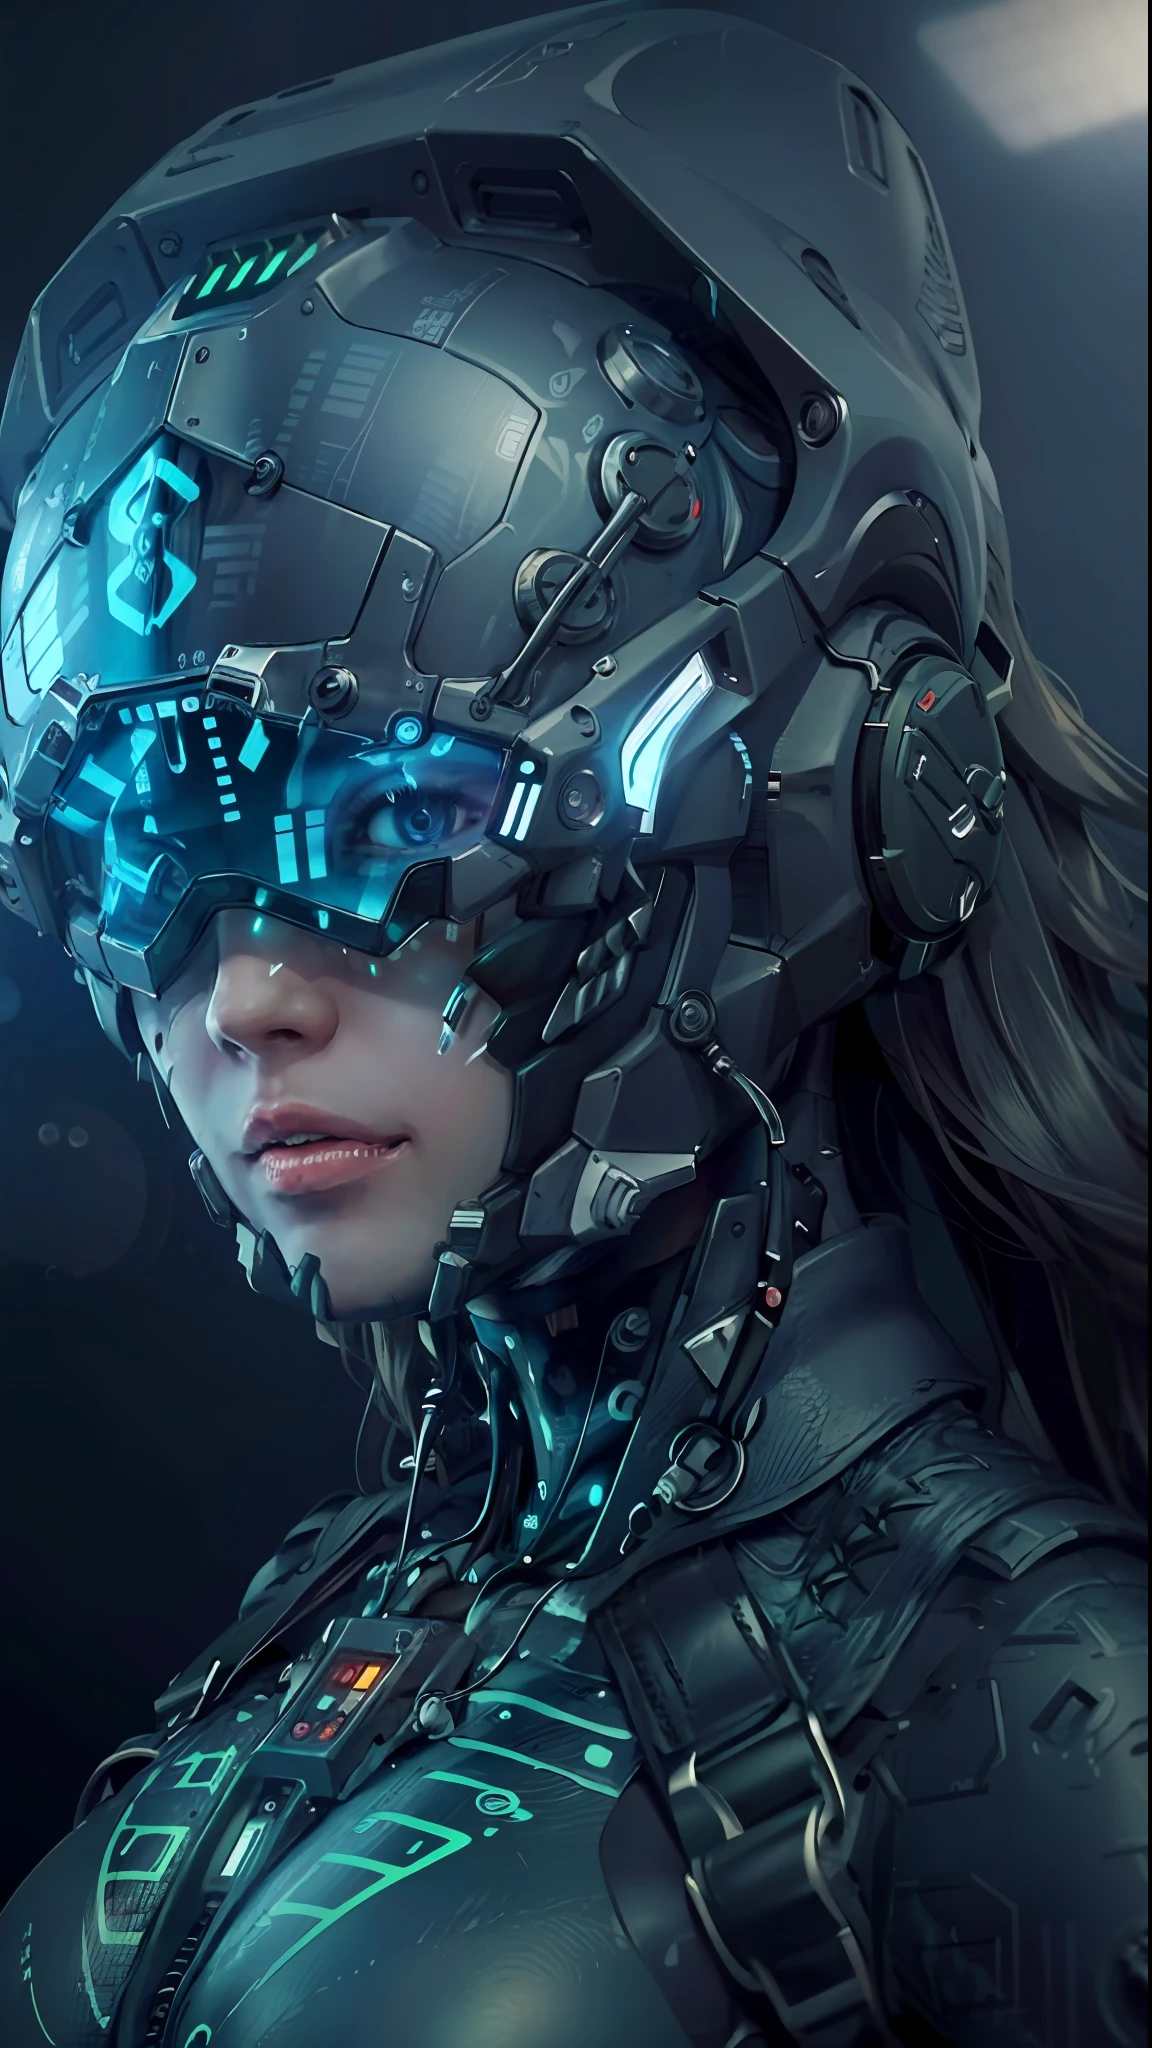 ((Best quality)), ((masterpiece)), (highly detailed:1.3), 3D,rfktr_technotrex, beautiful cyberpunk woman with voluminous hair hacking a computer terminal,computer servers, LCD screens, fibre optic cables, corporate logos,HDR (High Dynamic Range),Ray Tracing,NVIDIA RTX,Super-Resolution,Unreal 5,Subsurface scattering,PBR Texturing,Post-processing,Anisotropic Filtering,Depth-of-field,Maximum clarity and sharpness,Multi-layered textures,Albedo and Specular maps,Surface shading,Accurate simulation of light-material interaction,Perfect proportions,Octane Render,Two-tone lighting,Low ISO,White balance,Rule of thirds,Wide aperature,8K RAW,Efficient Sub-Pixel,sub-pixel convolution,luminescent particles,light scattering,Tyndall effect,walking